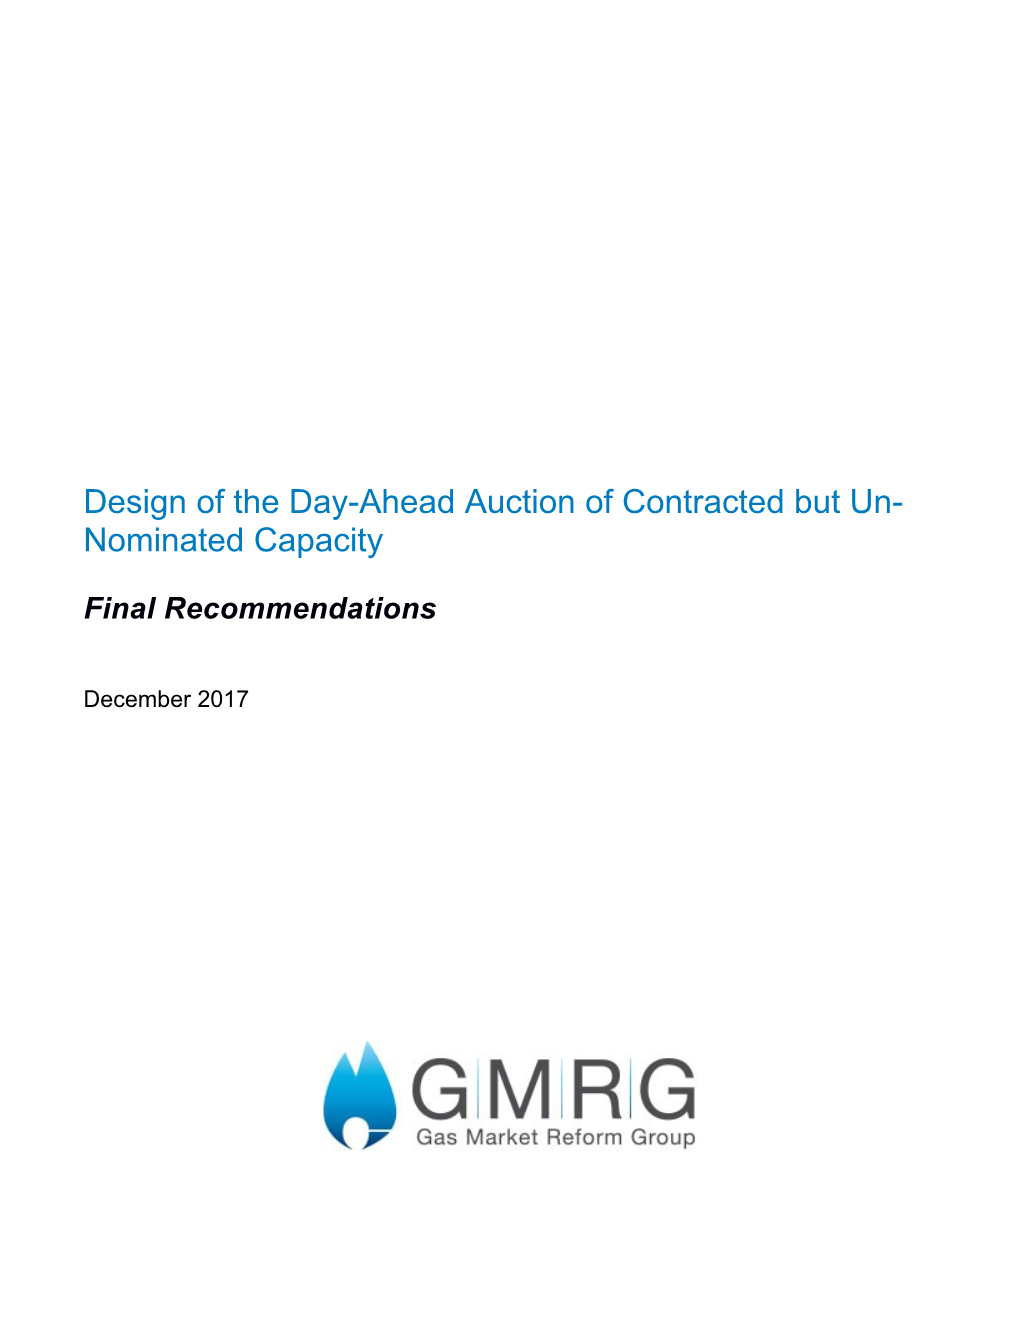 Design of Day-Ahead Auction of Contracted by Un-Nominated Capacity - Final Recommendations